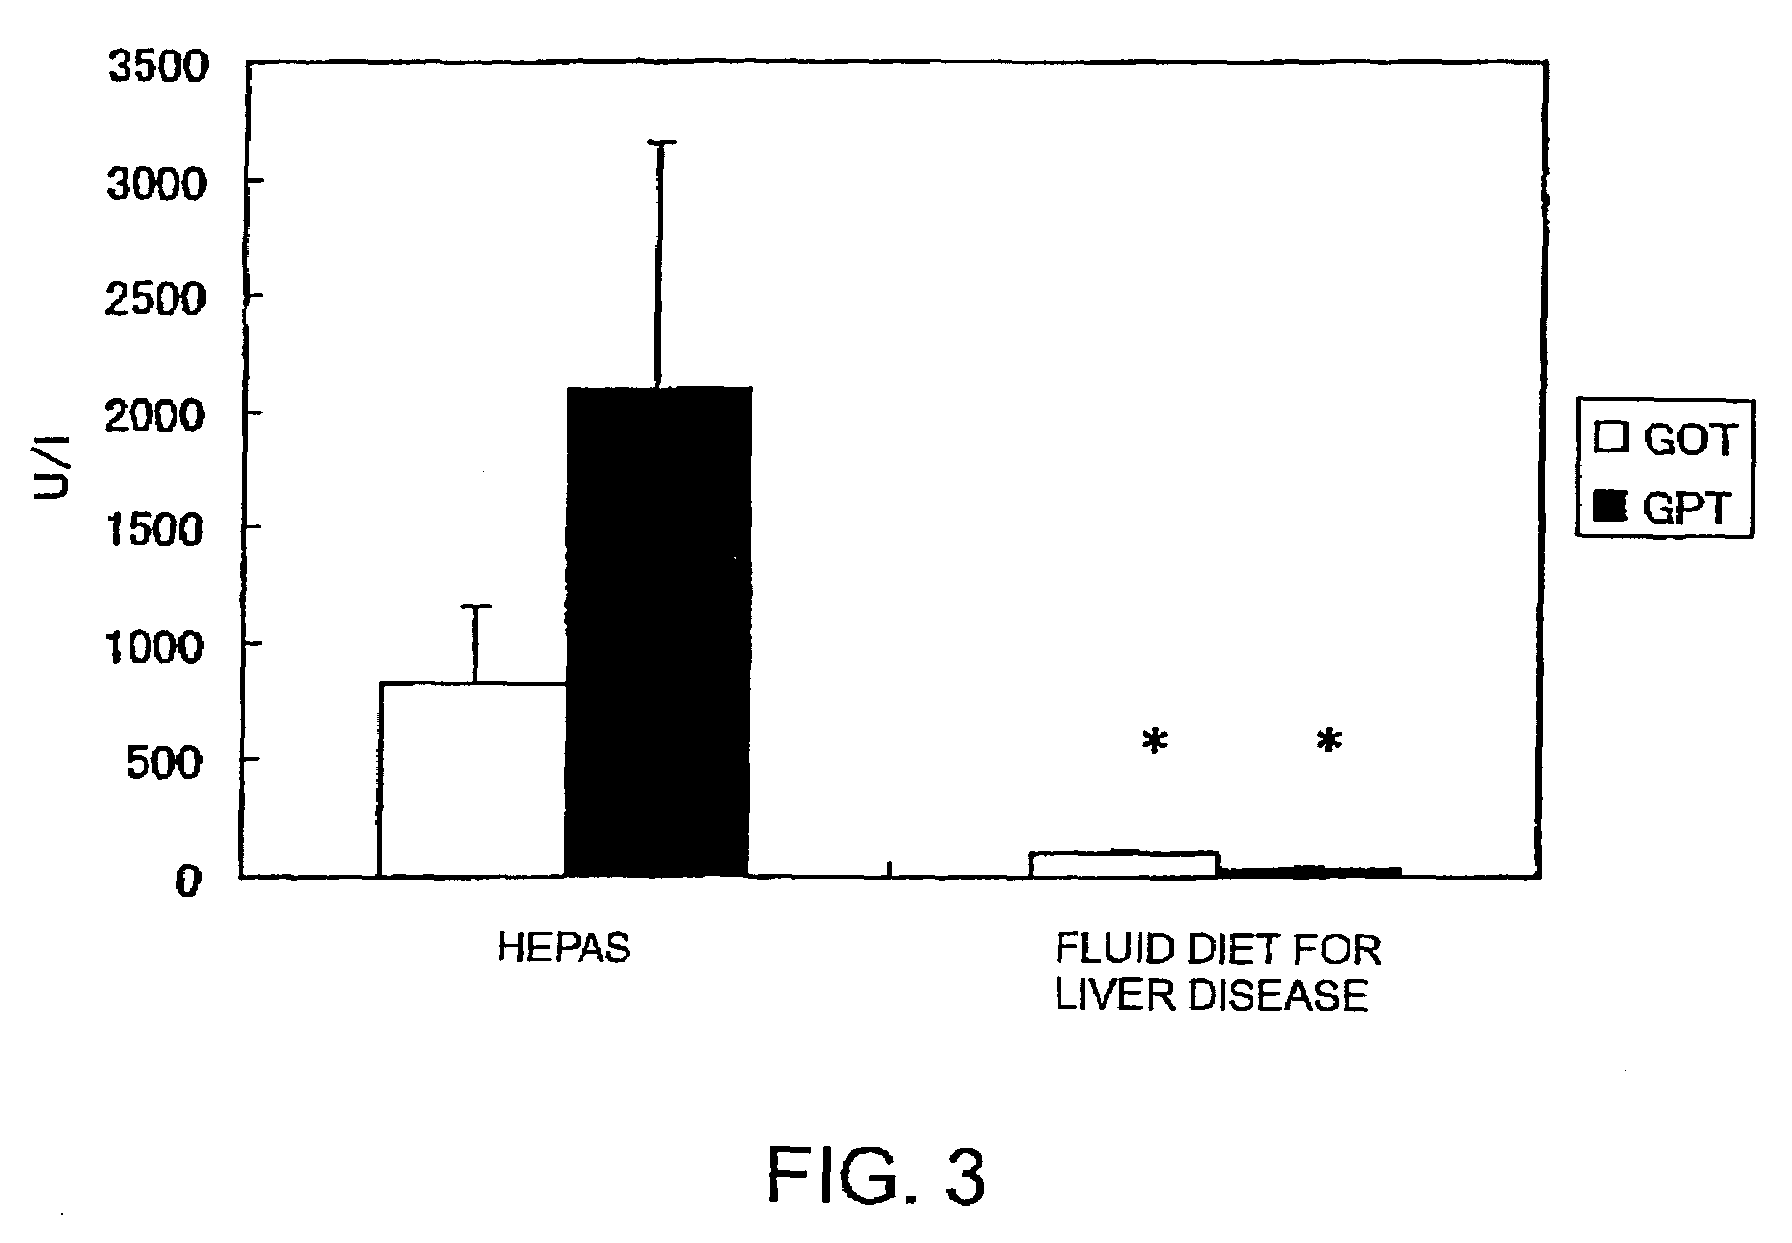 Nutritional compositions for nutritional management of patients with liver disease